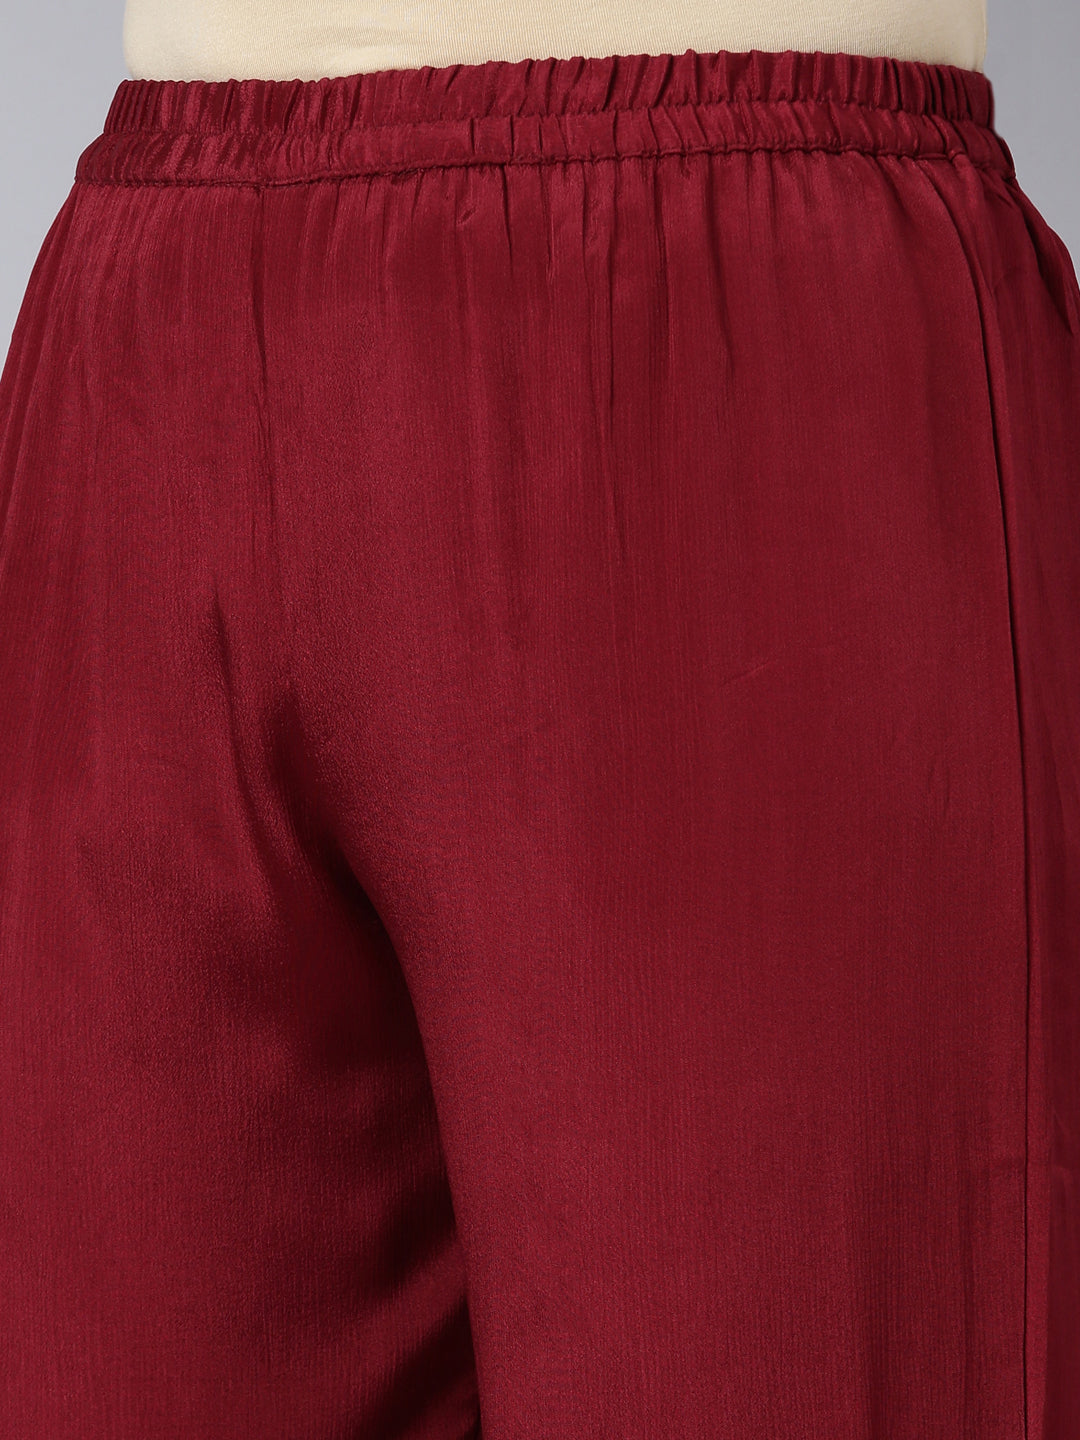 Neerus Maroon Regular Straight Solid Top And Trousers